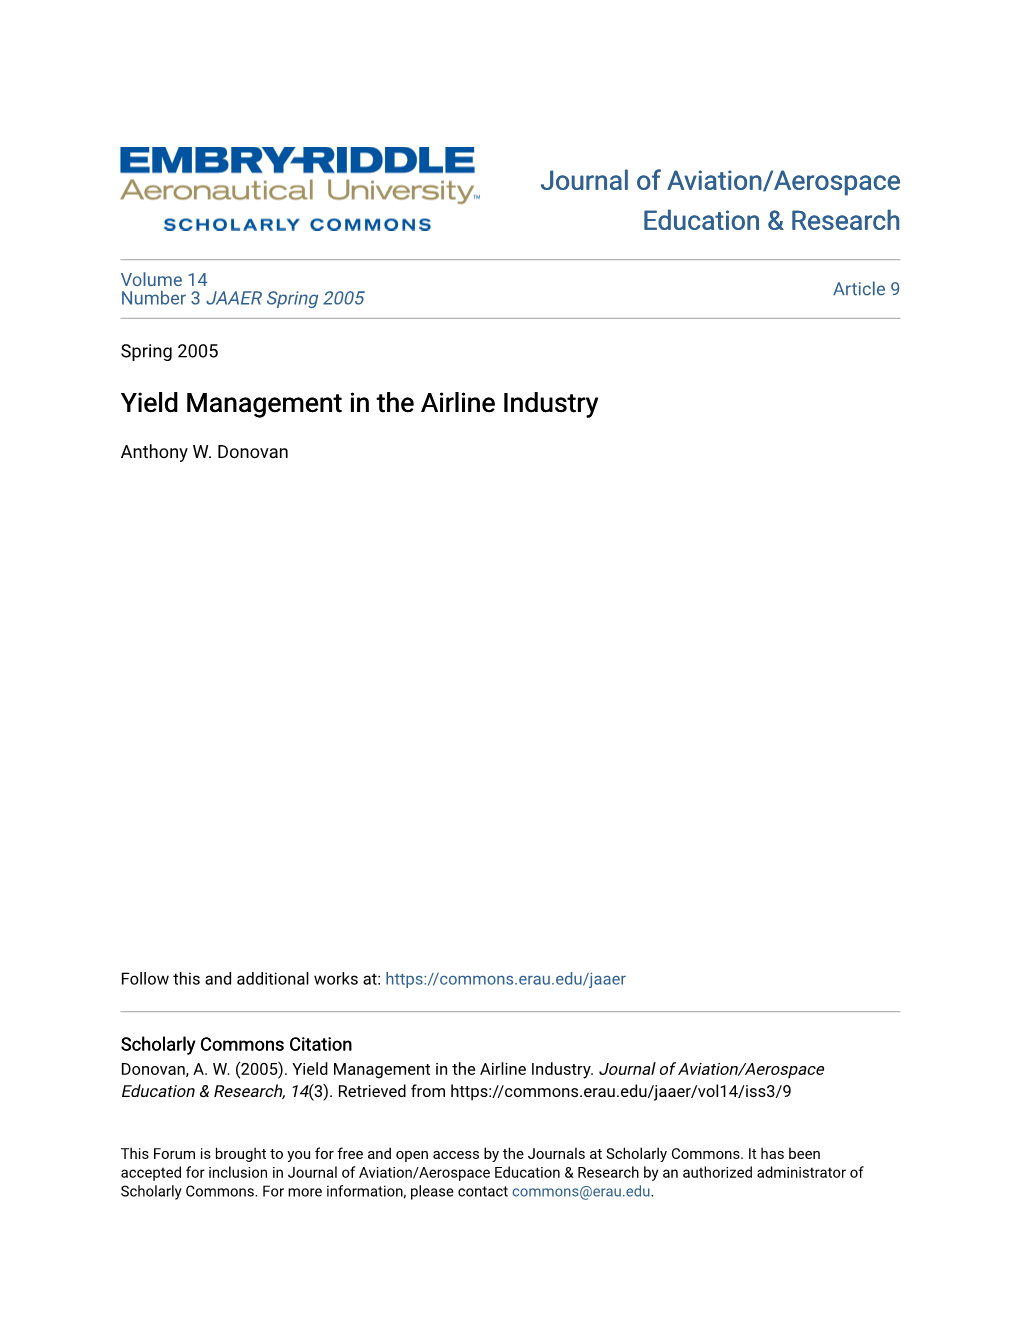 Yield Management in the Airline Industry